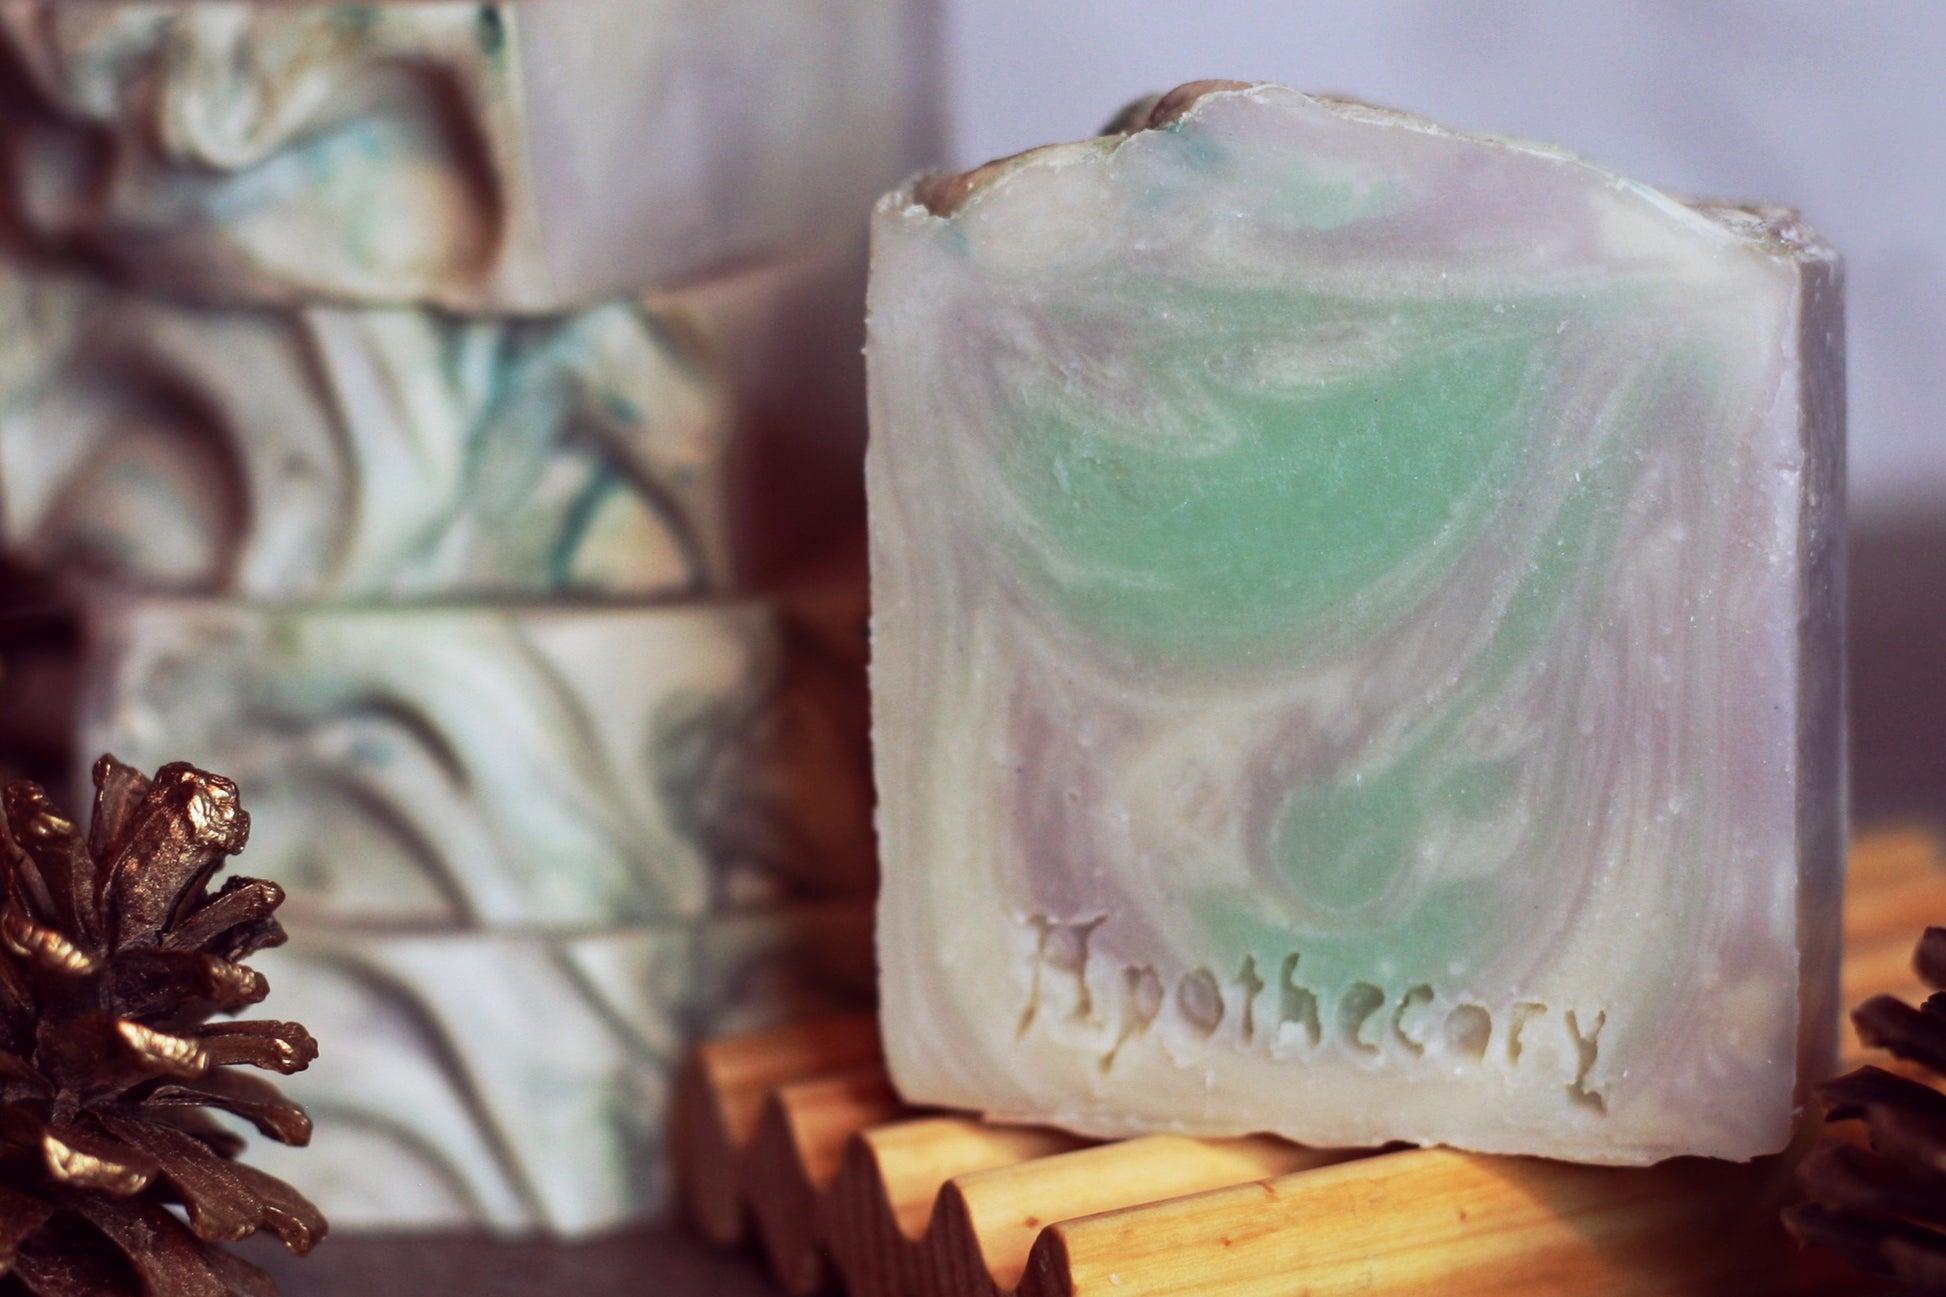 Nightingale pine and lavender scented handmade soap swirled with sea green, white, and purple